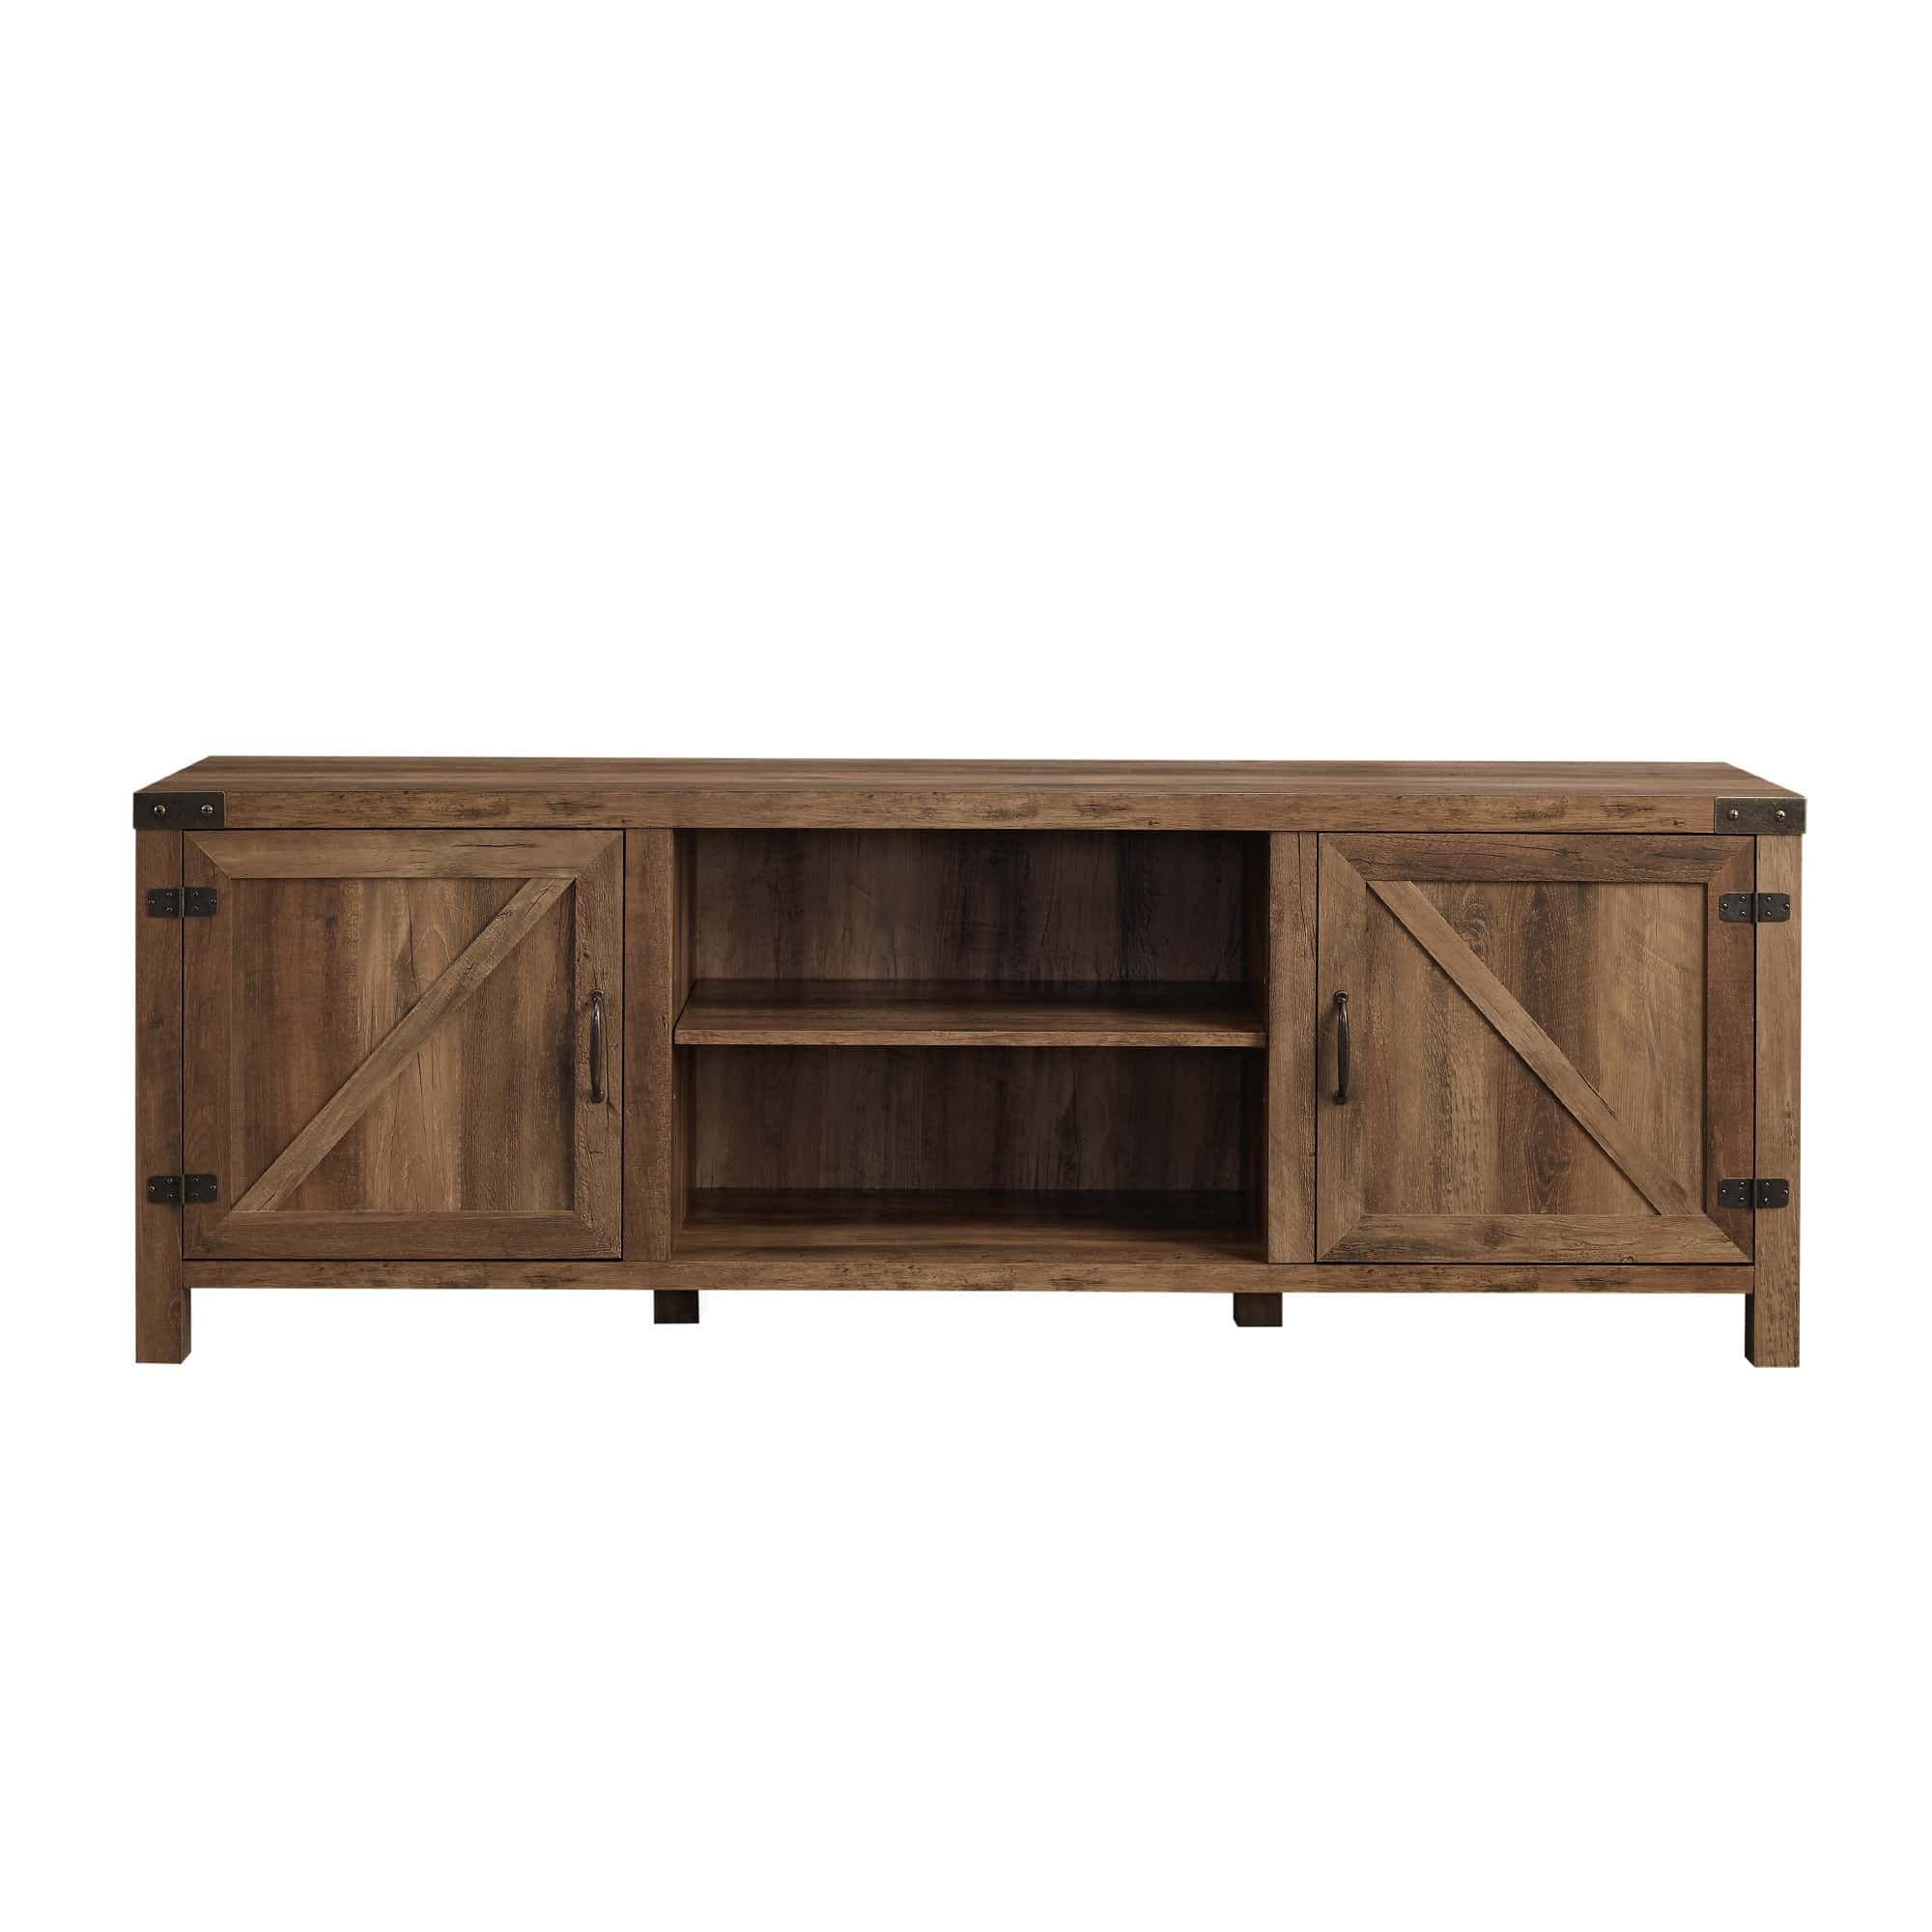 70 Inch Modern Farmhouse Tv Stand – Rustic Oakwalker Edison Within Farmhouse Tv Stands For 70 Inch Tv (View 10 of 20)